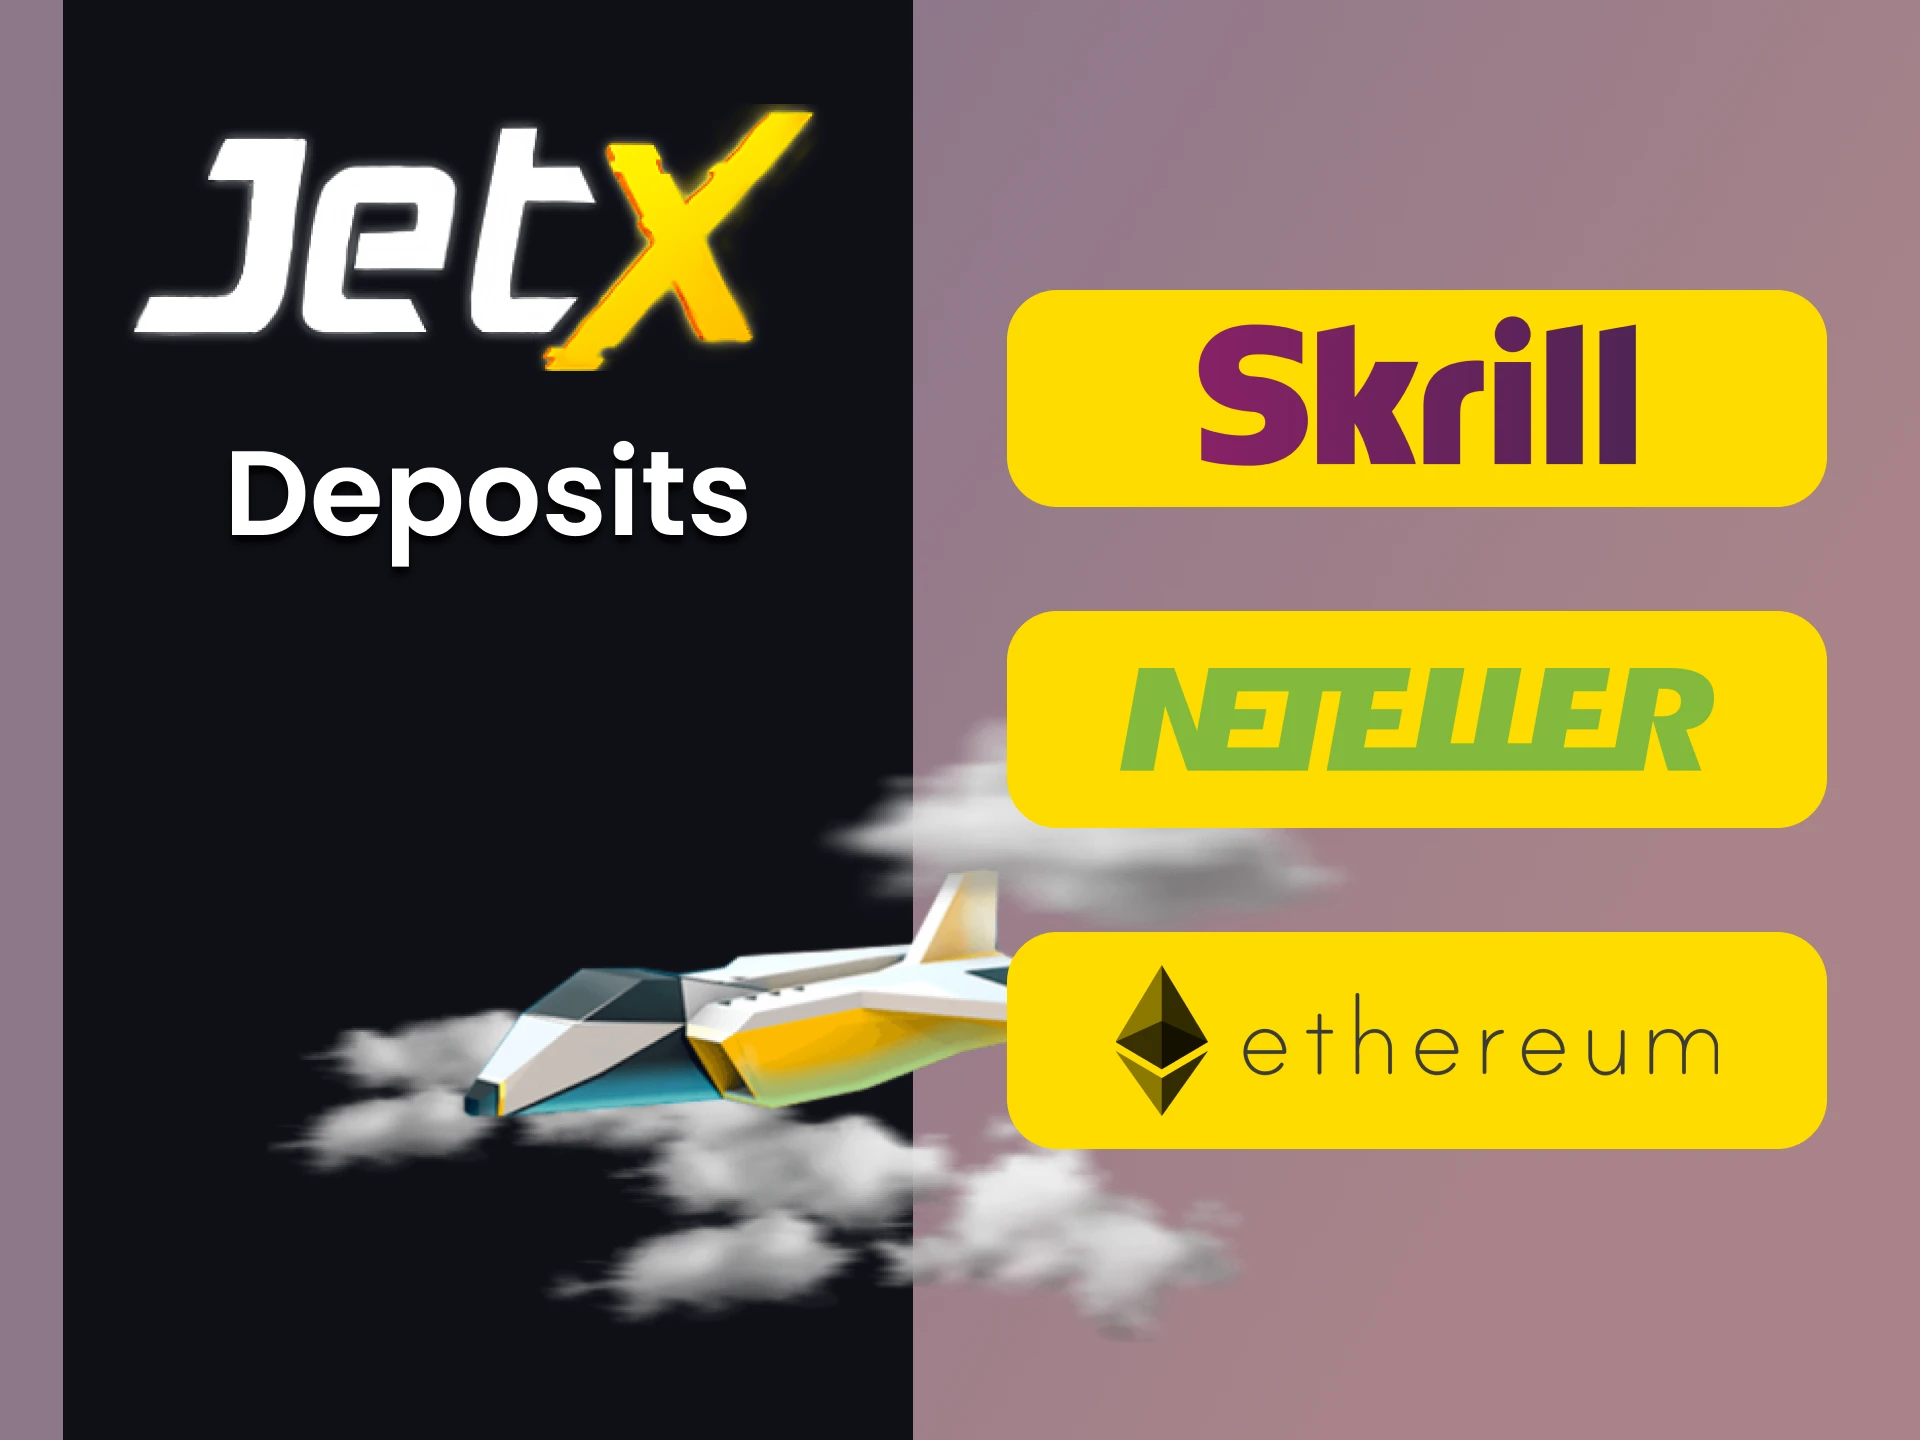 Find out what deposit methods are available for the JetX game.